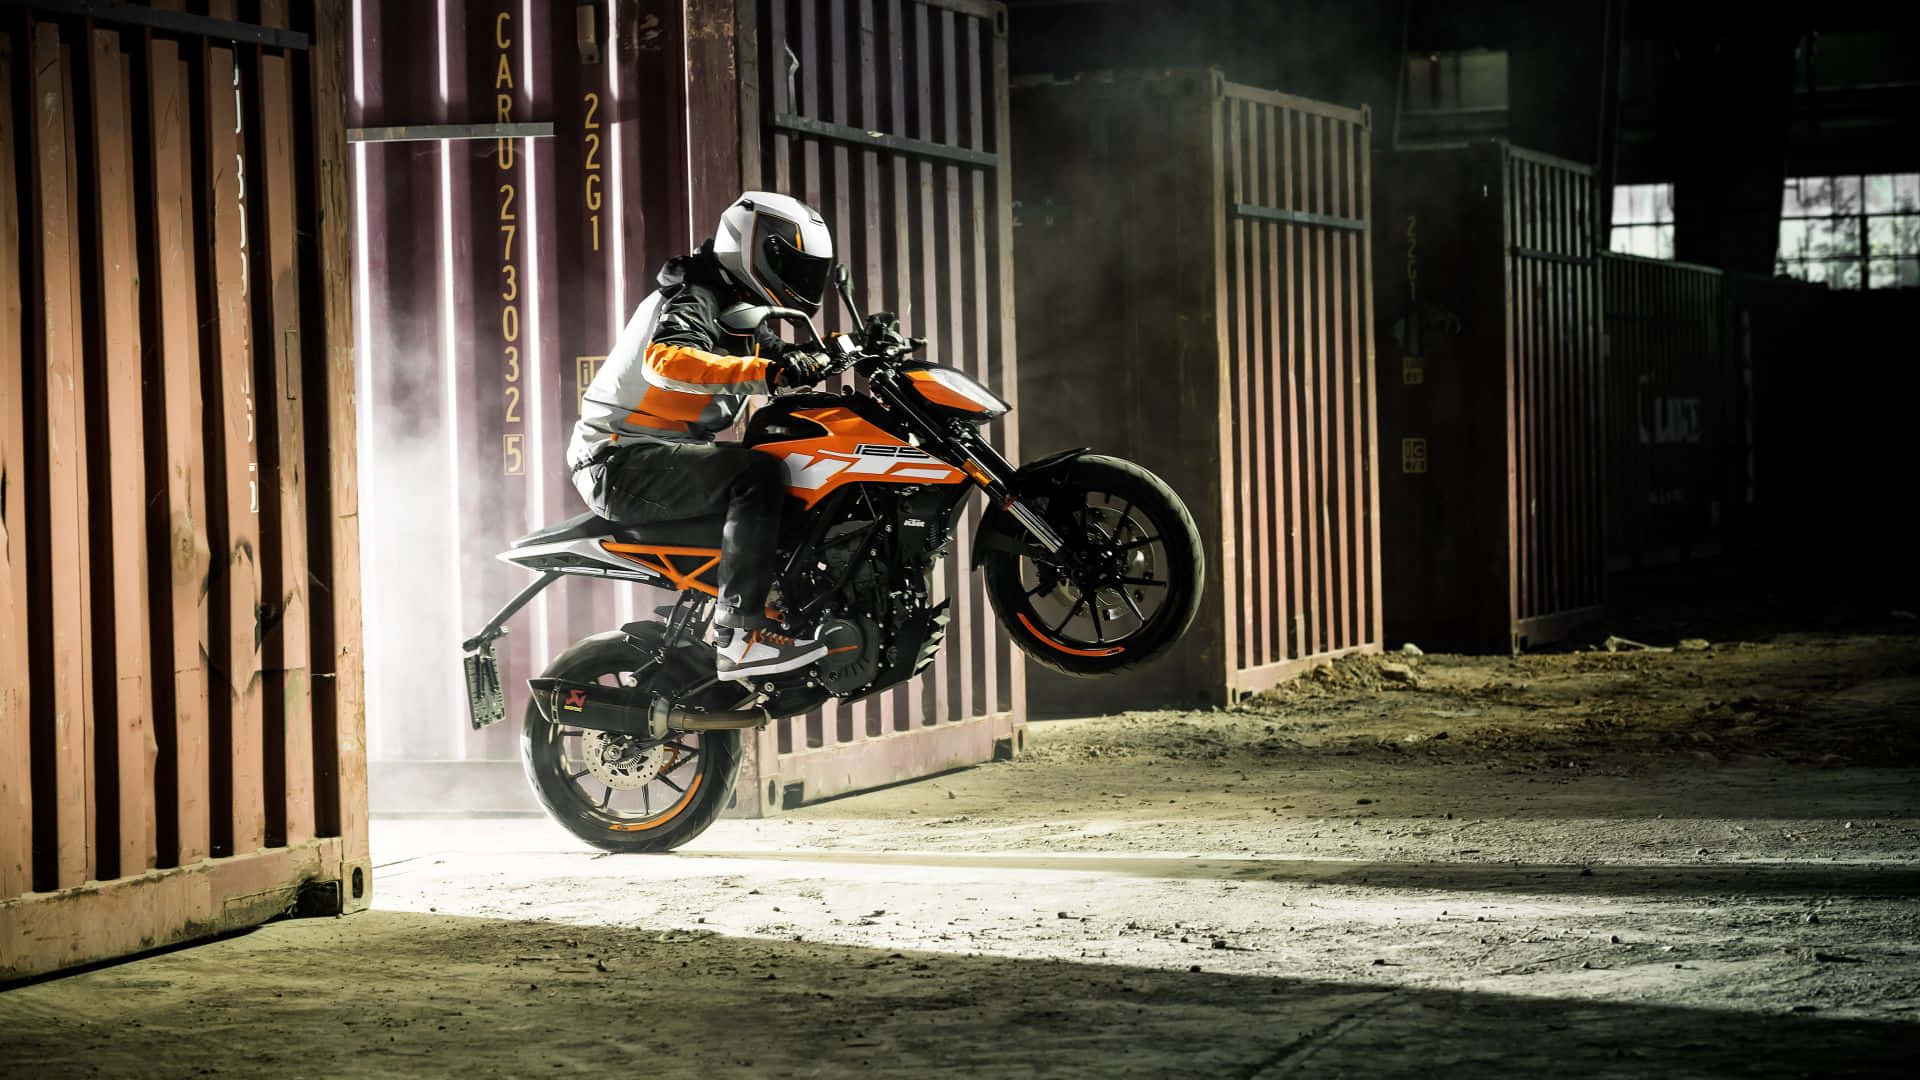 Engaging Ride With The Dynamic Ktm Sports Bike Wallpaper